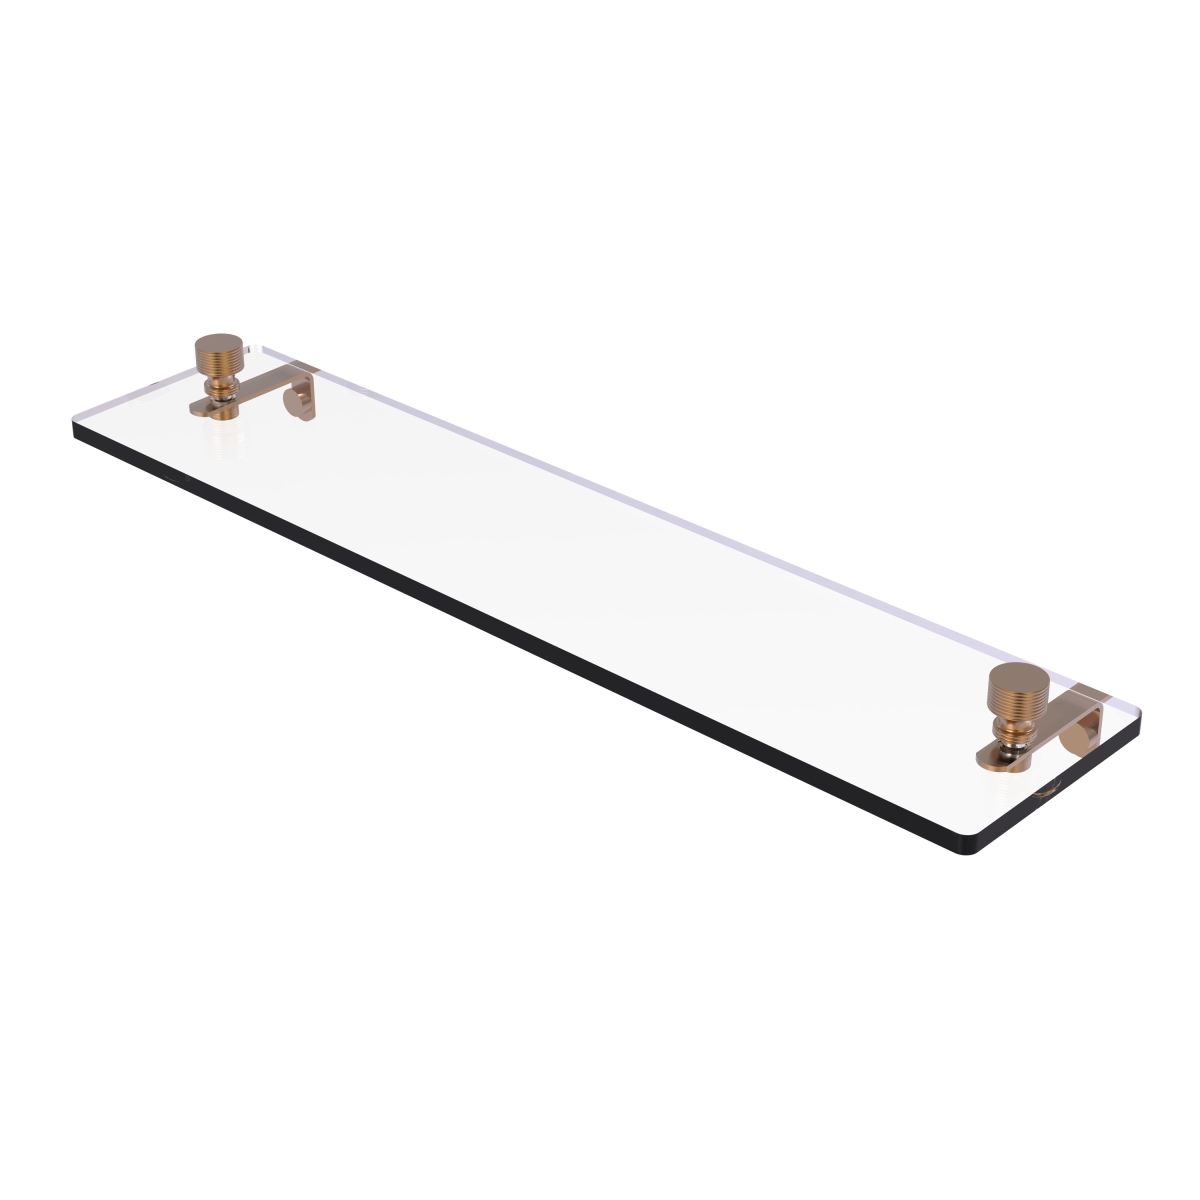 Allied Brass FT-1-22-BBR Foxtrot 22 in. Glass Vanity Shelf with Beveled Edges, Brushed Bronze